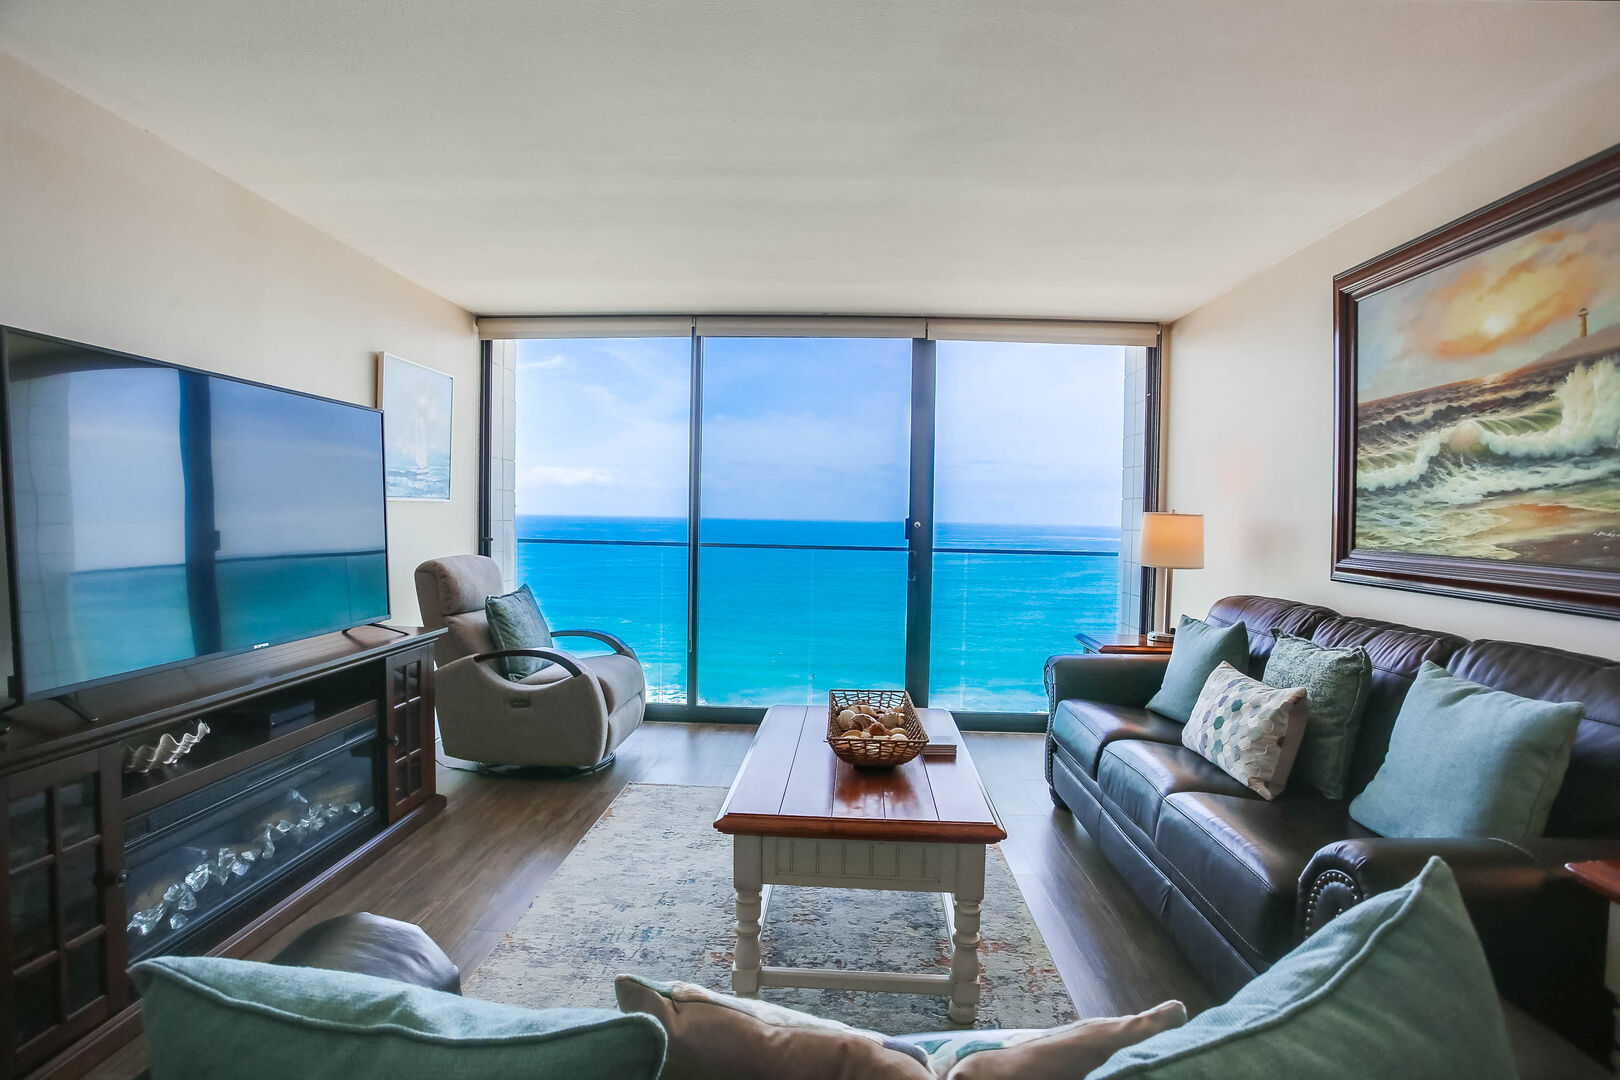 Living room with a queen size sofa bed, TV, recliner and an ocean view